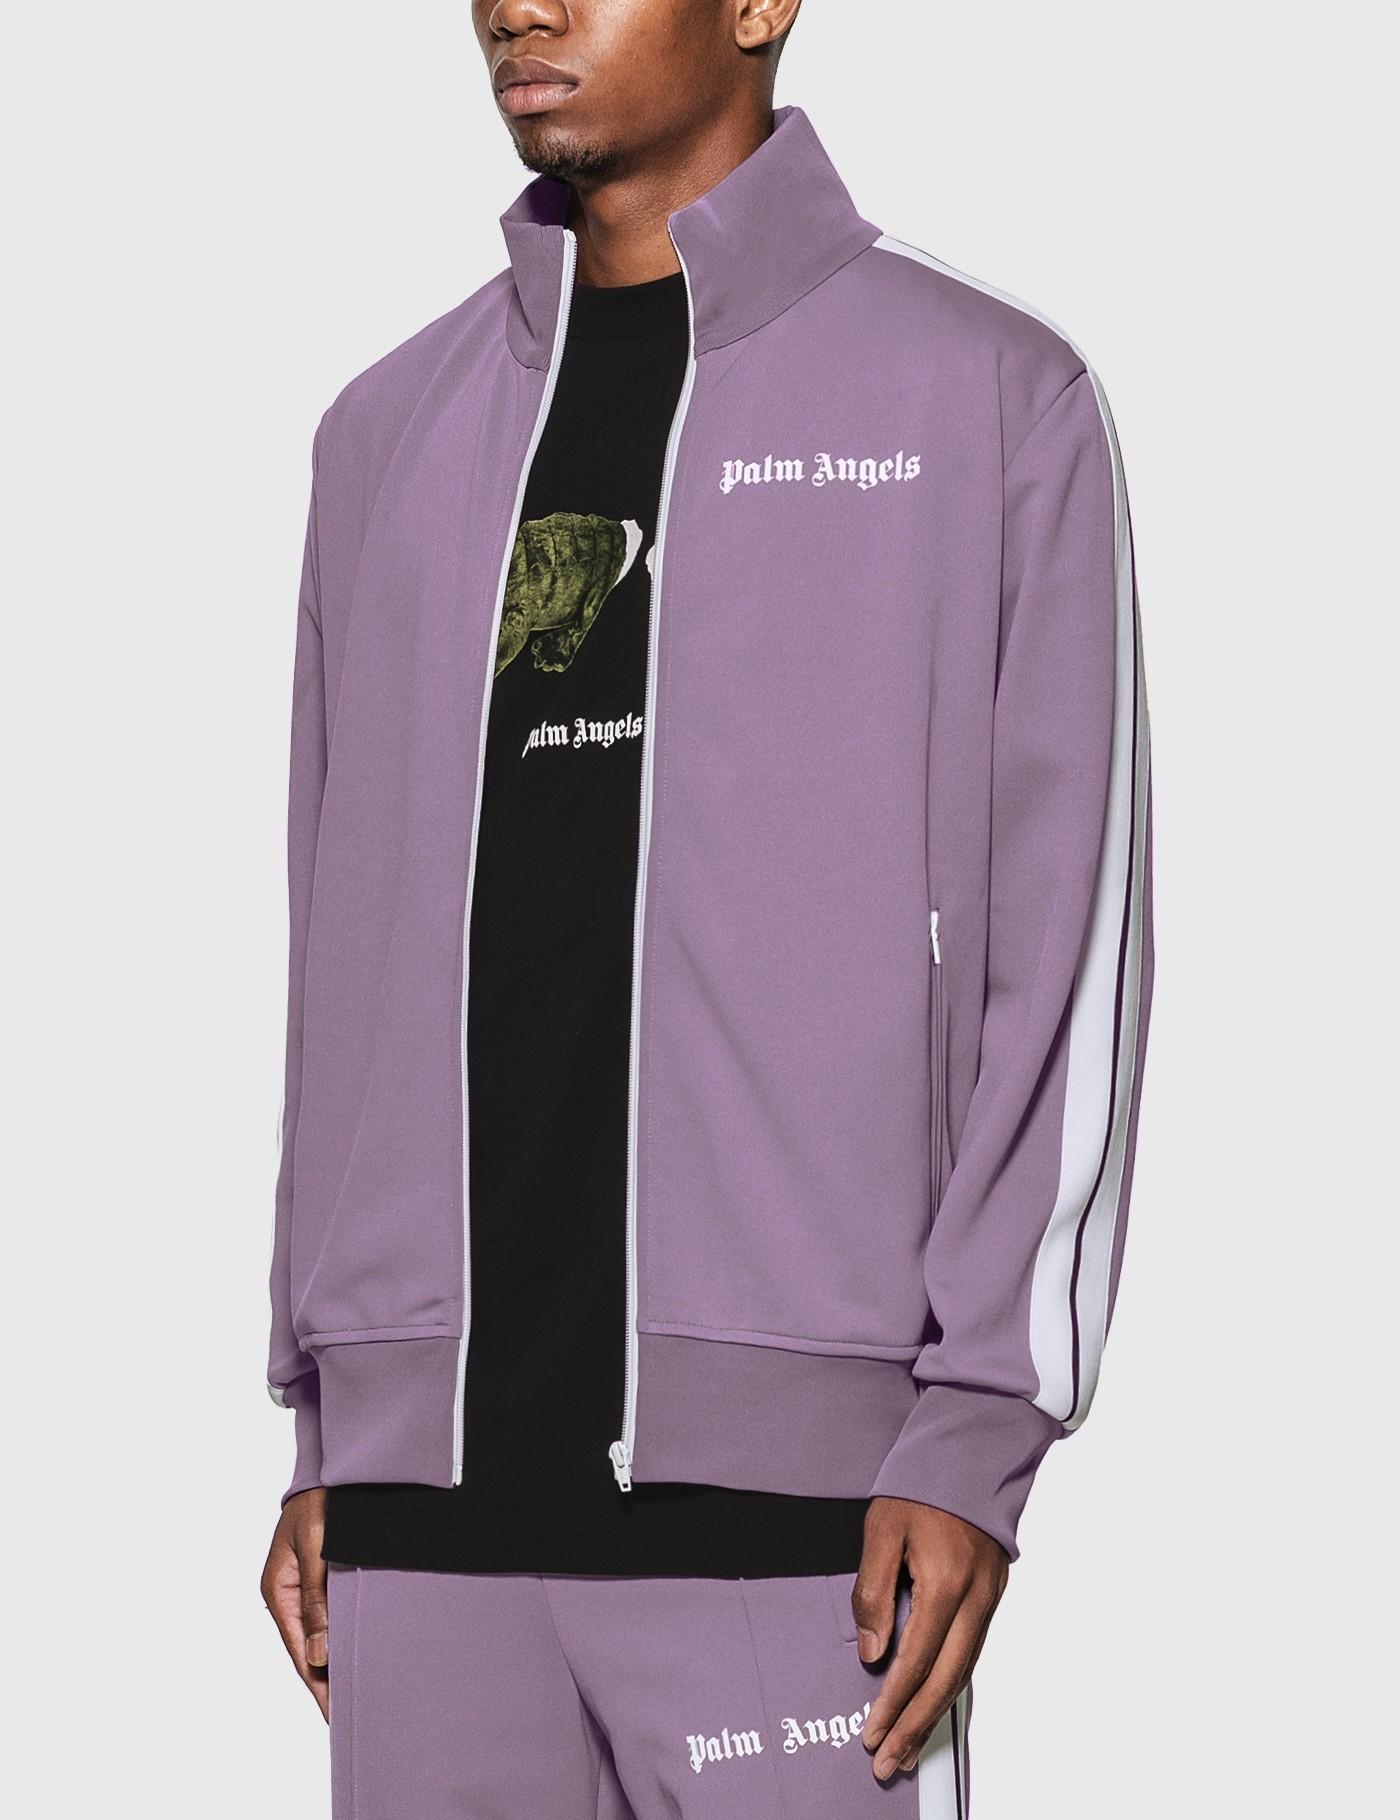 Palm Angels Classic Track Jacket in Purple for Men - Lyst